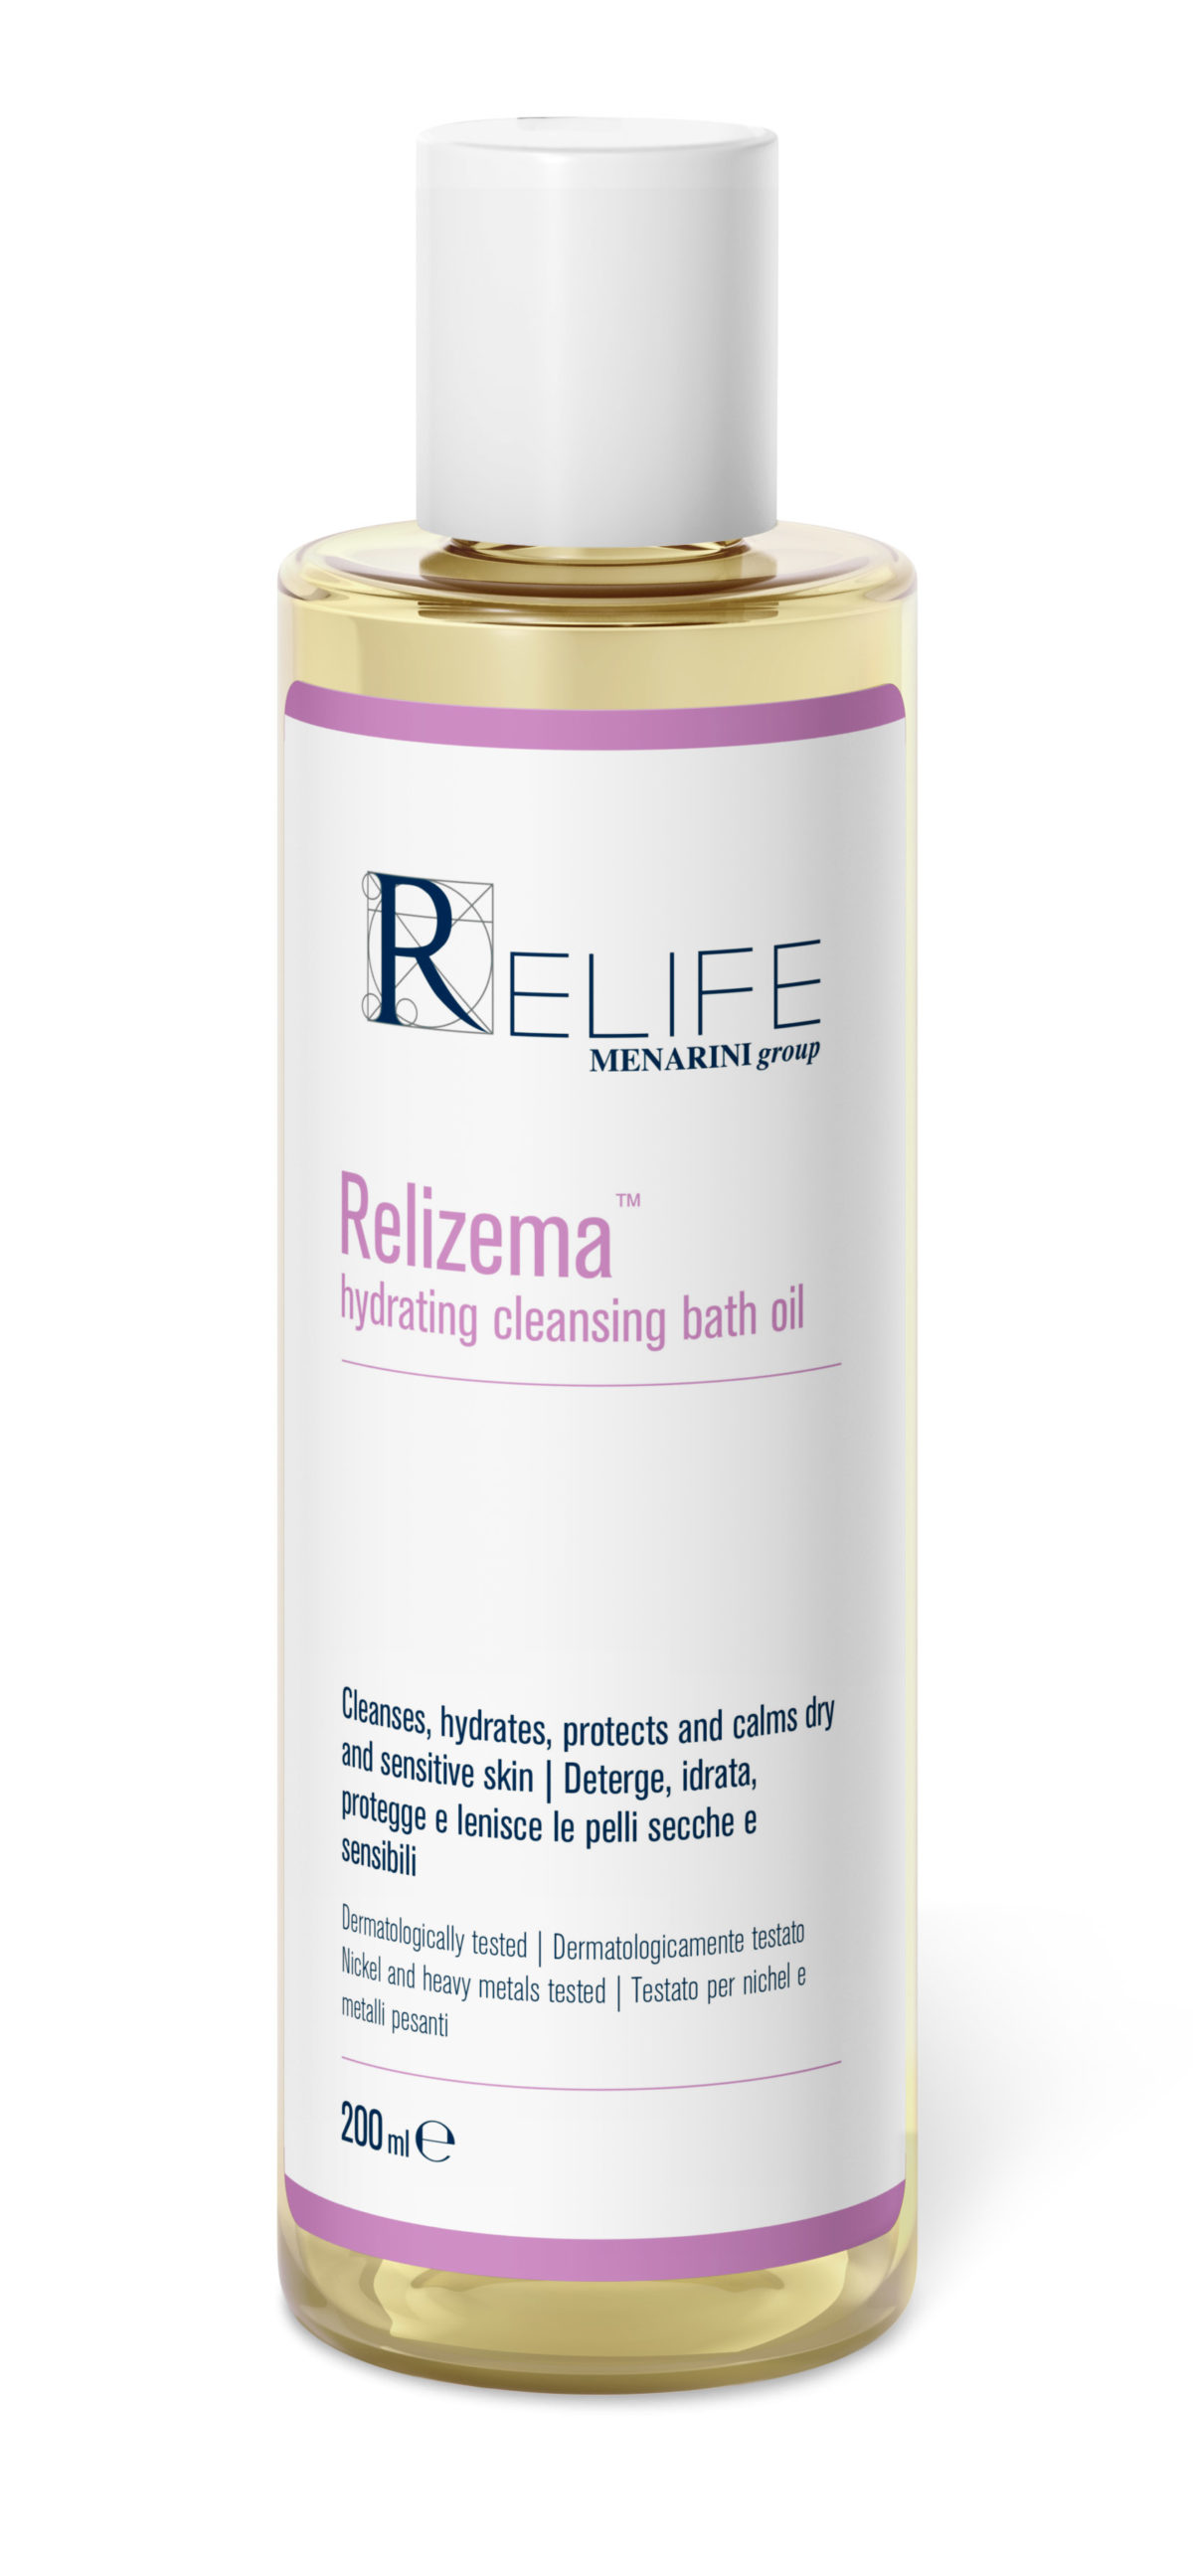 Relizema hydradting cleansing bath oil 200mls